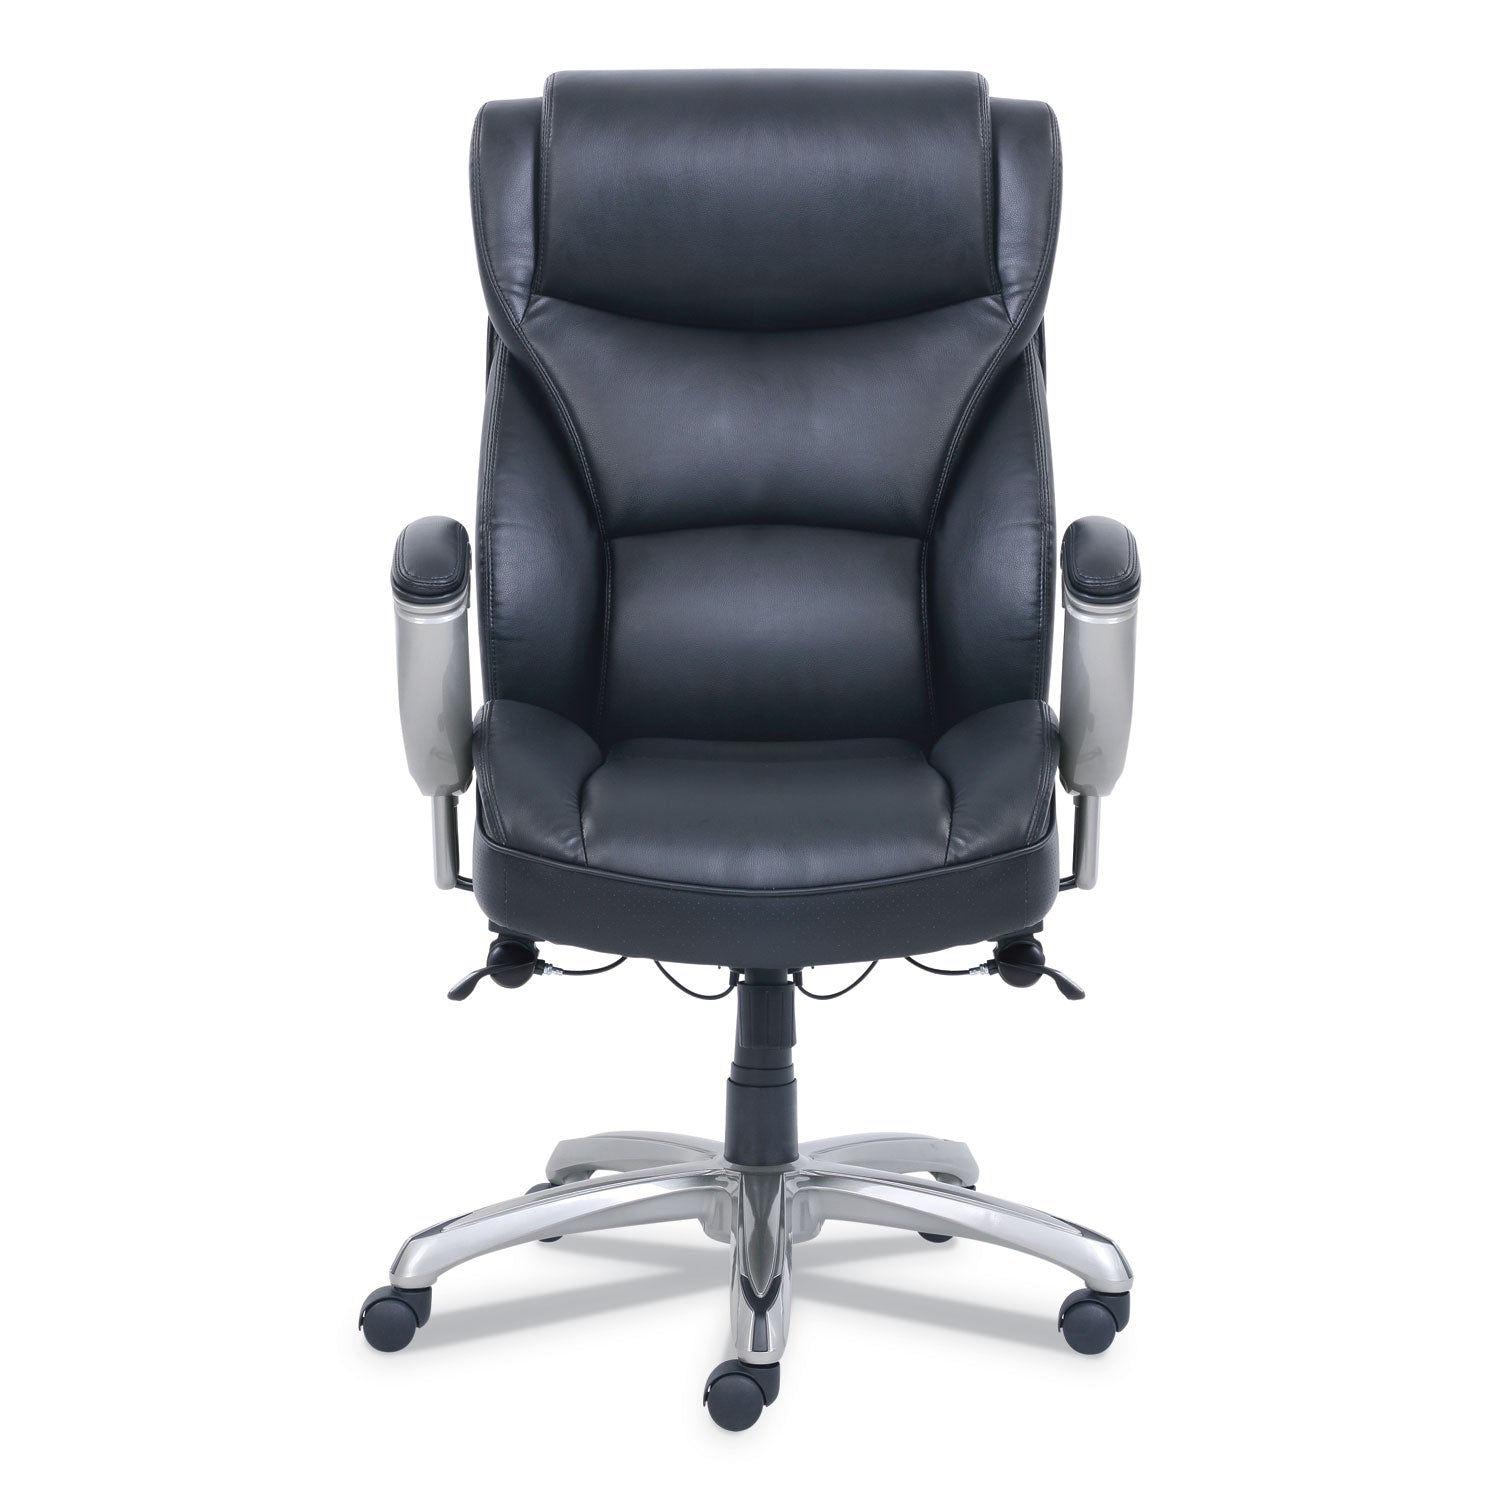 emerson-big-and-tall-task-chair-supports-up-to-400-lb-195-to-225-seat-height-black-seat-back-silver-base_srj49416blk - 2